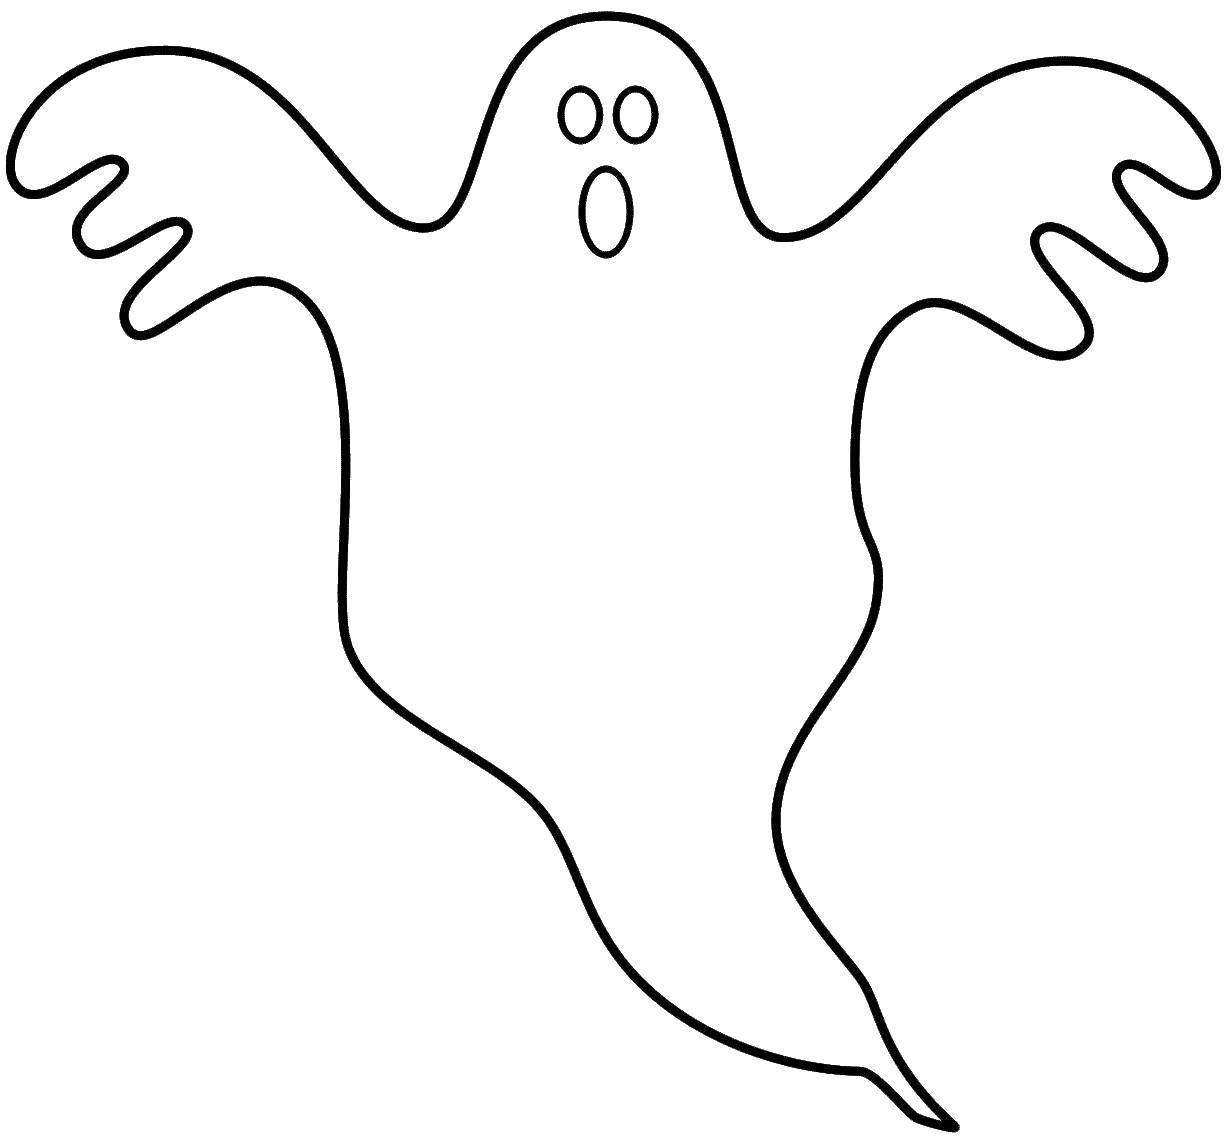 Coloring Ghost. Category Ghost . Tags:  Ghost , Ghost.